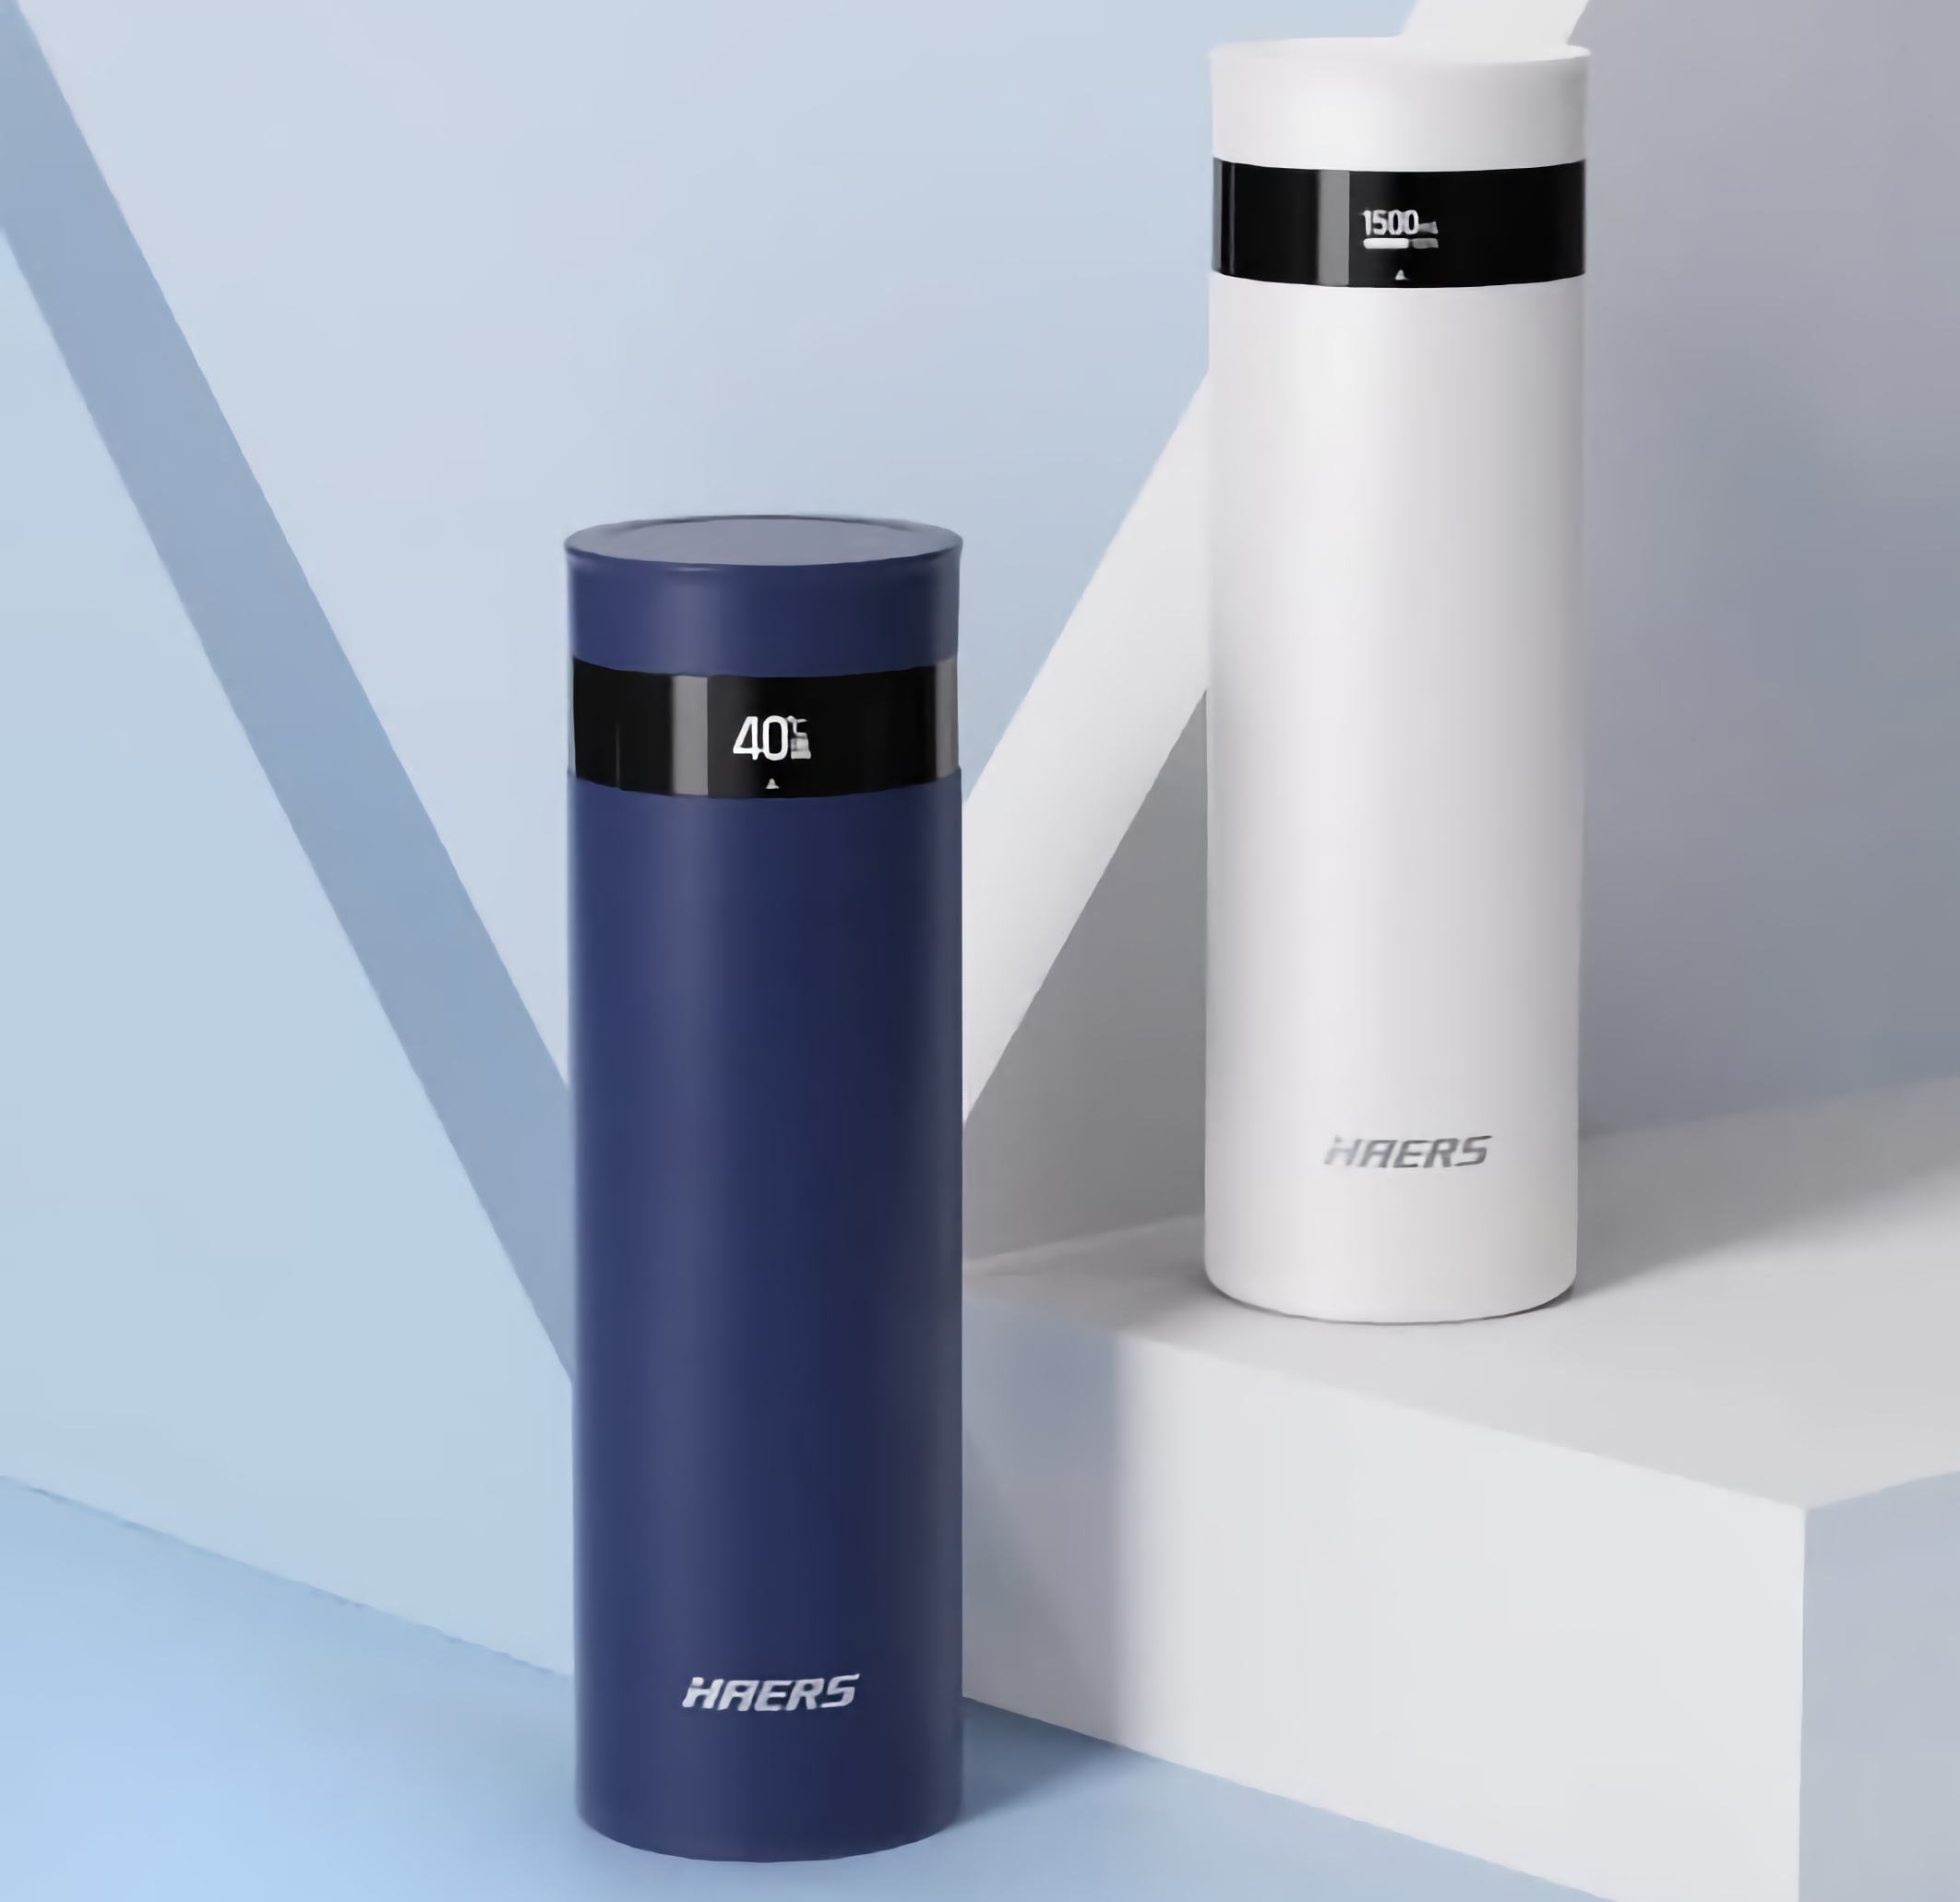 Huawei unveils Haers smart bottle with temperature sensor, Bluetooth and HarmonyOS 